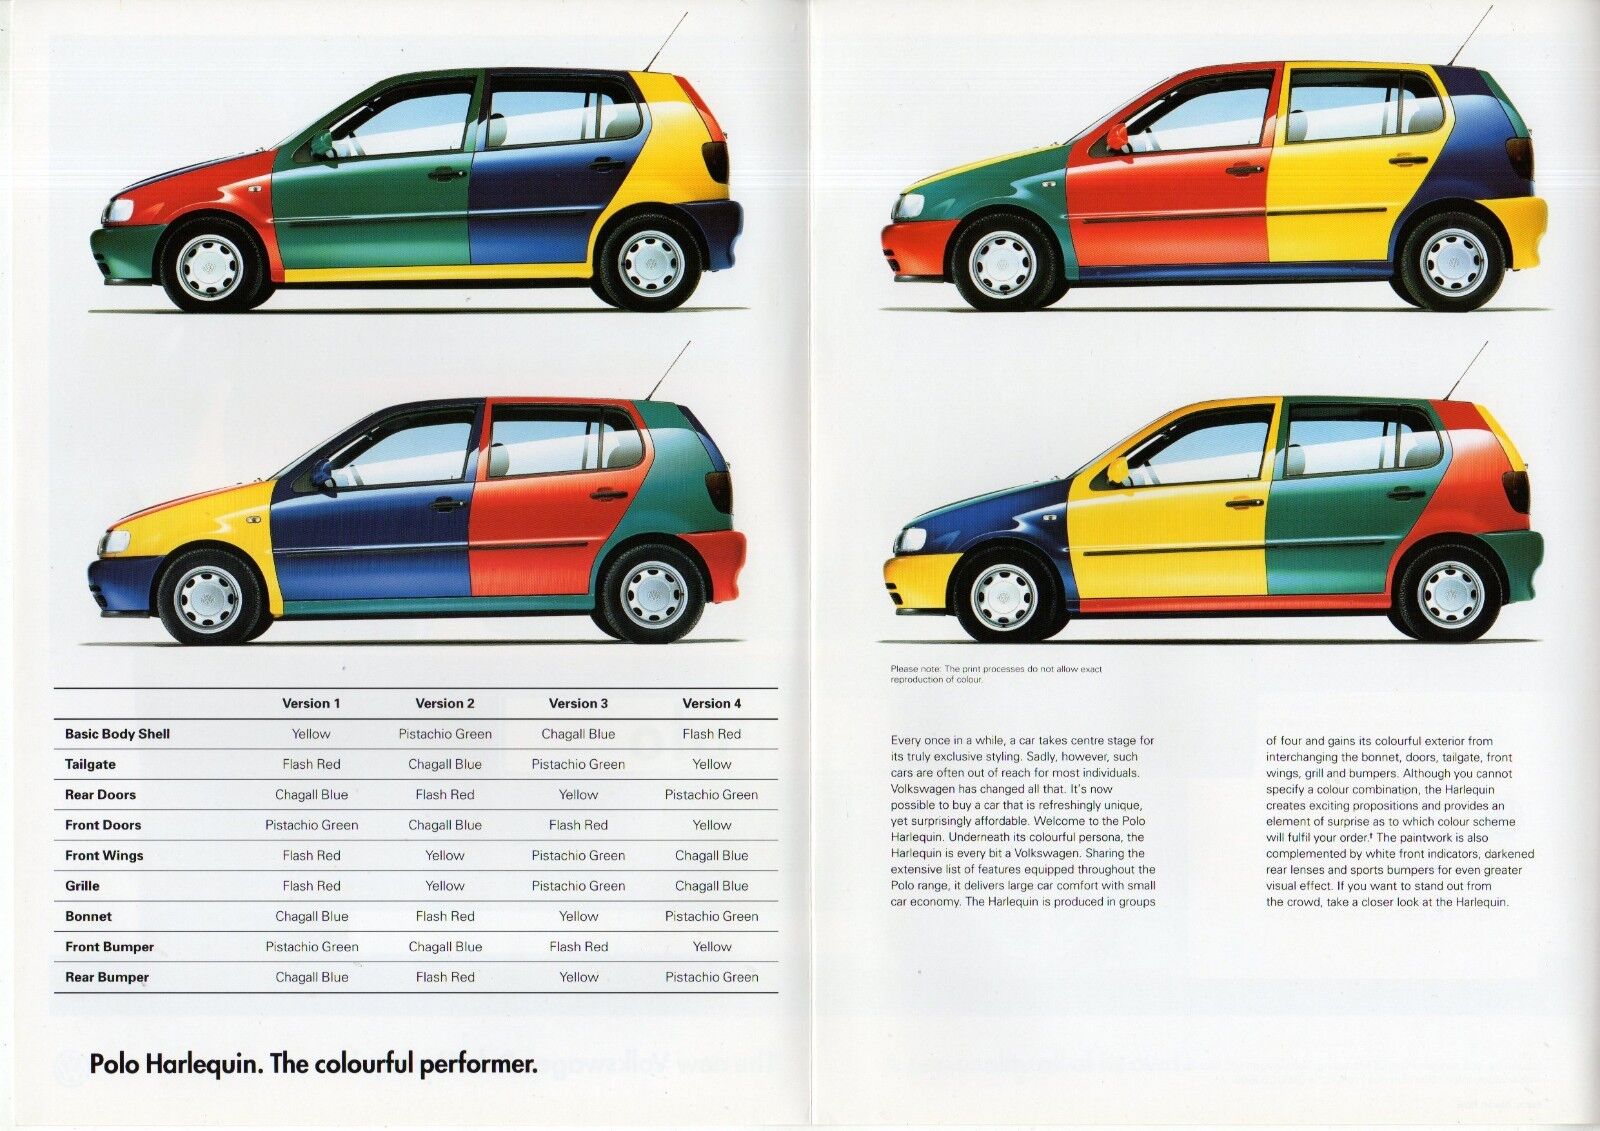 VW Polo Harlequin colours